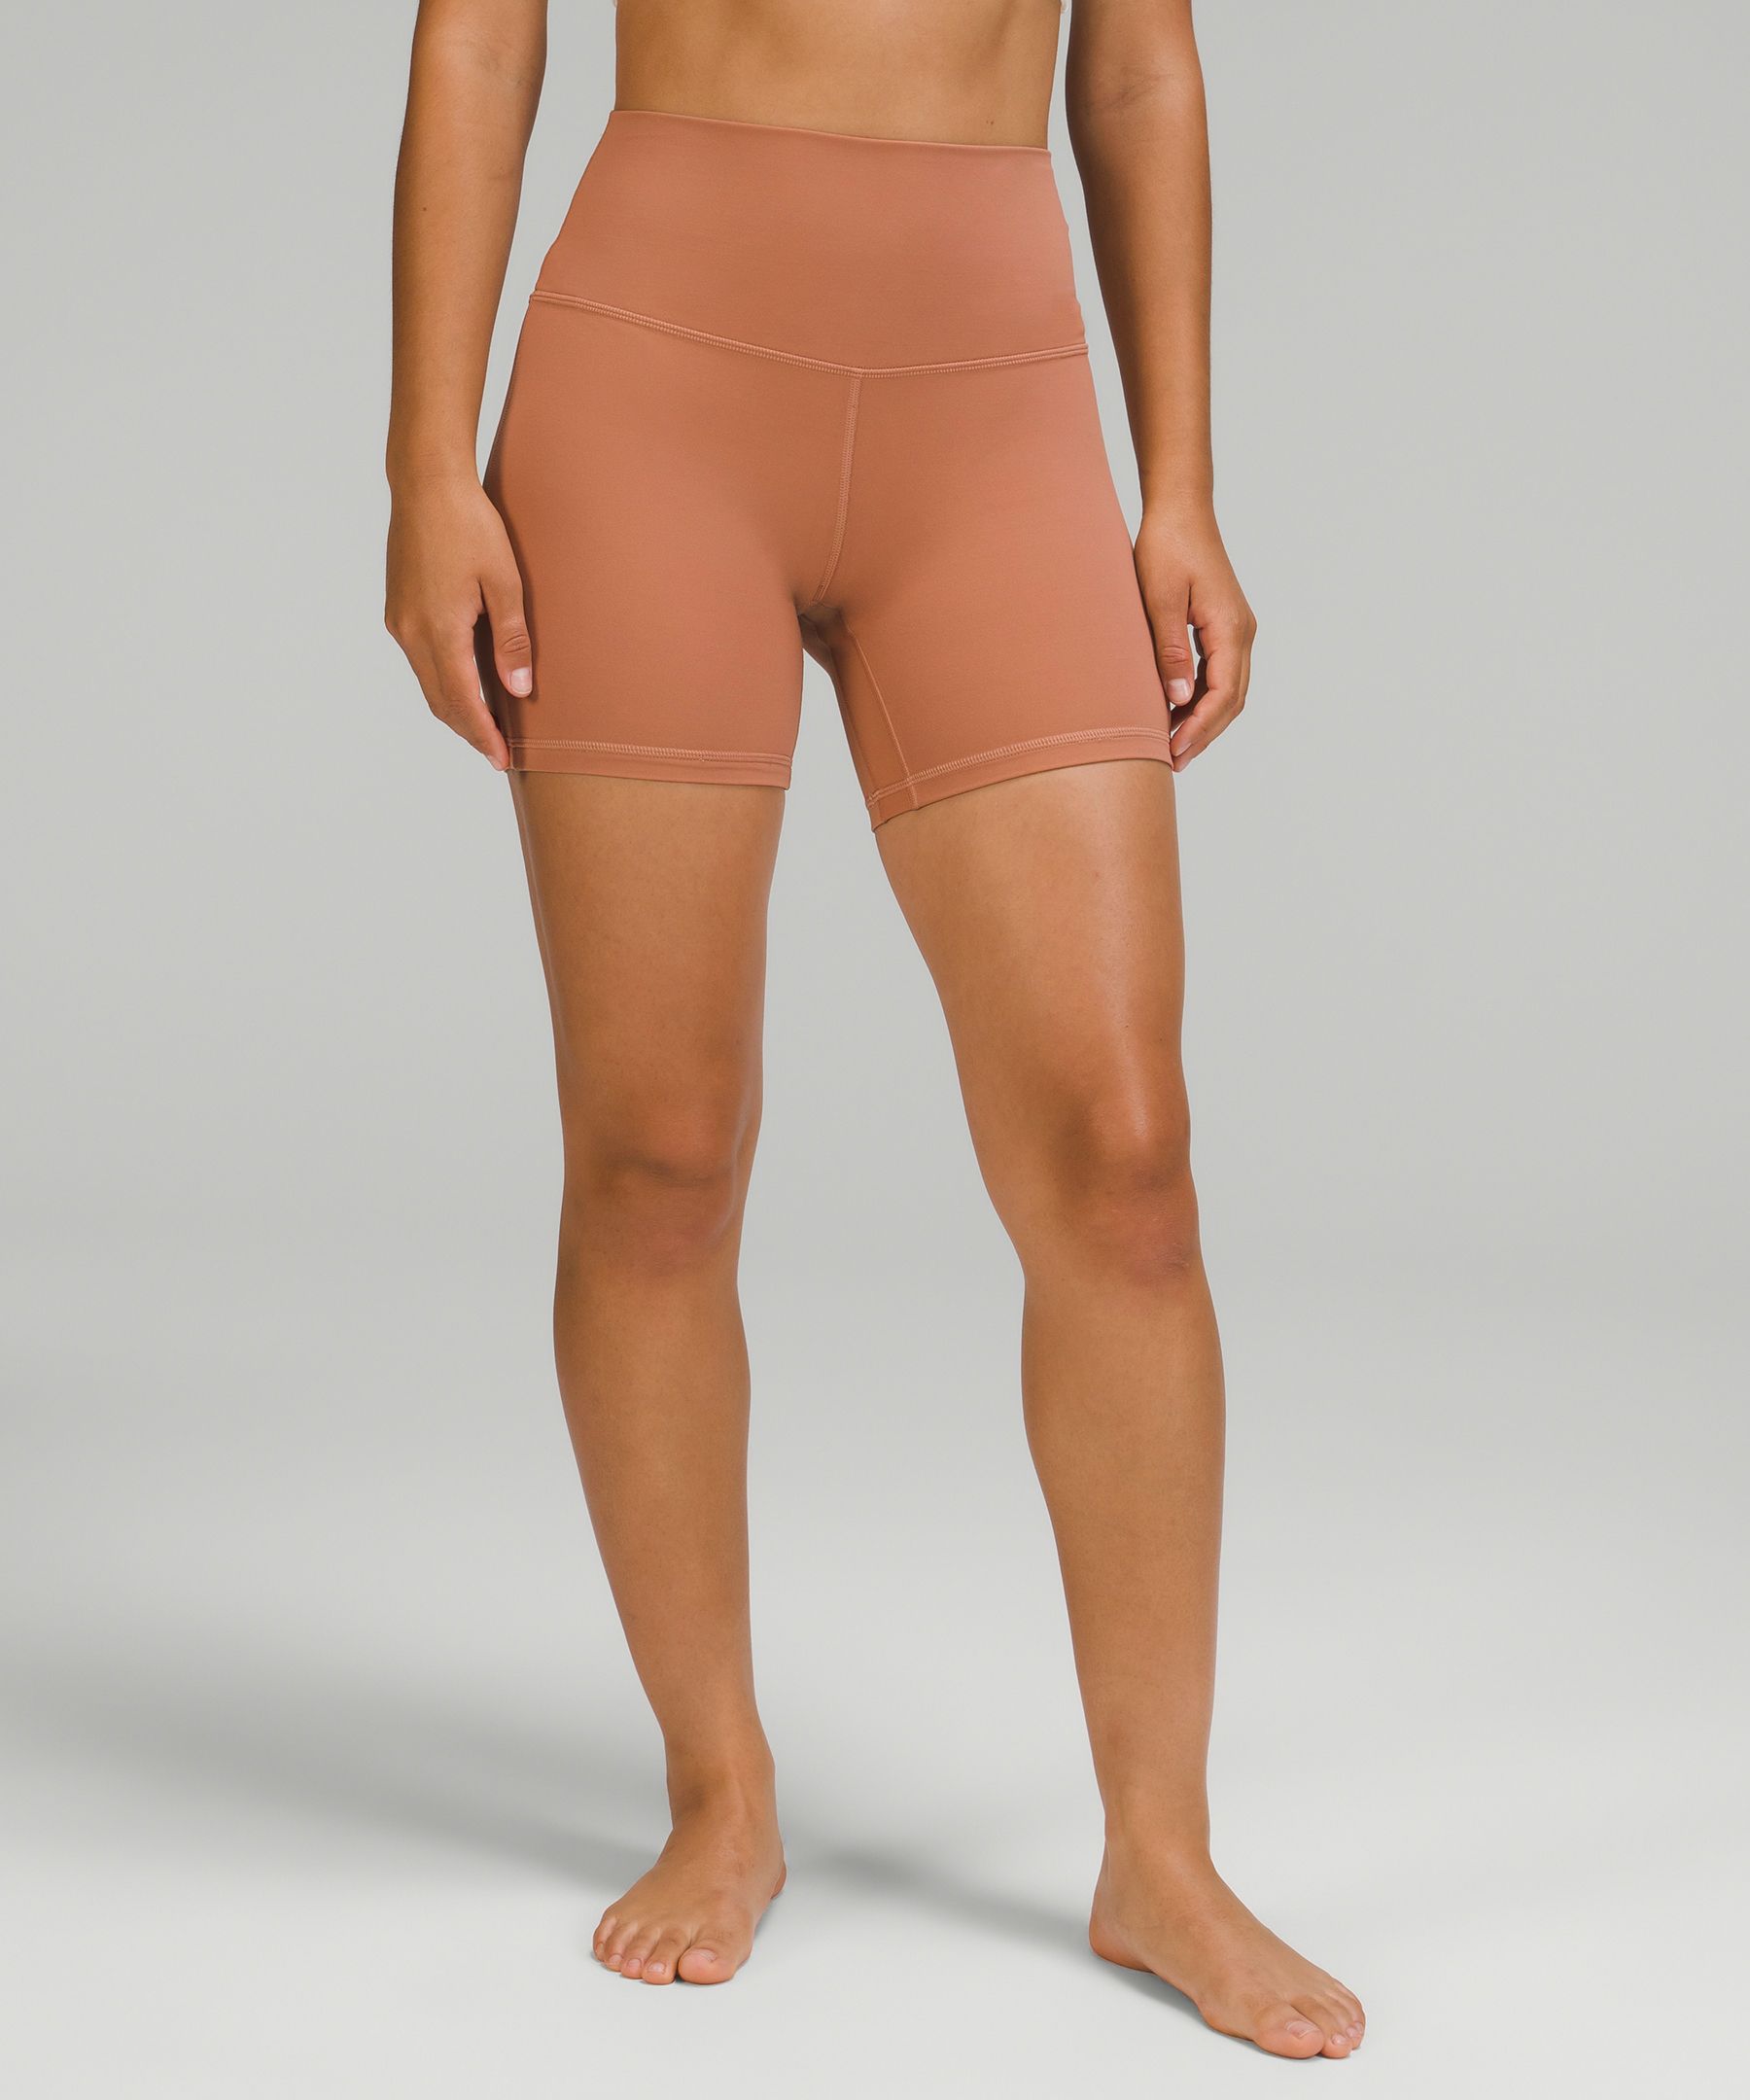 Lululemon Align™ High-rise Shorts 6" In Dusty Clay